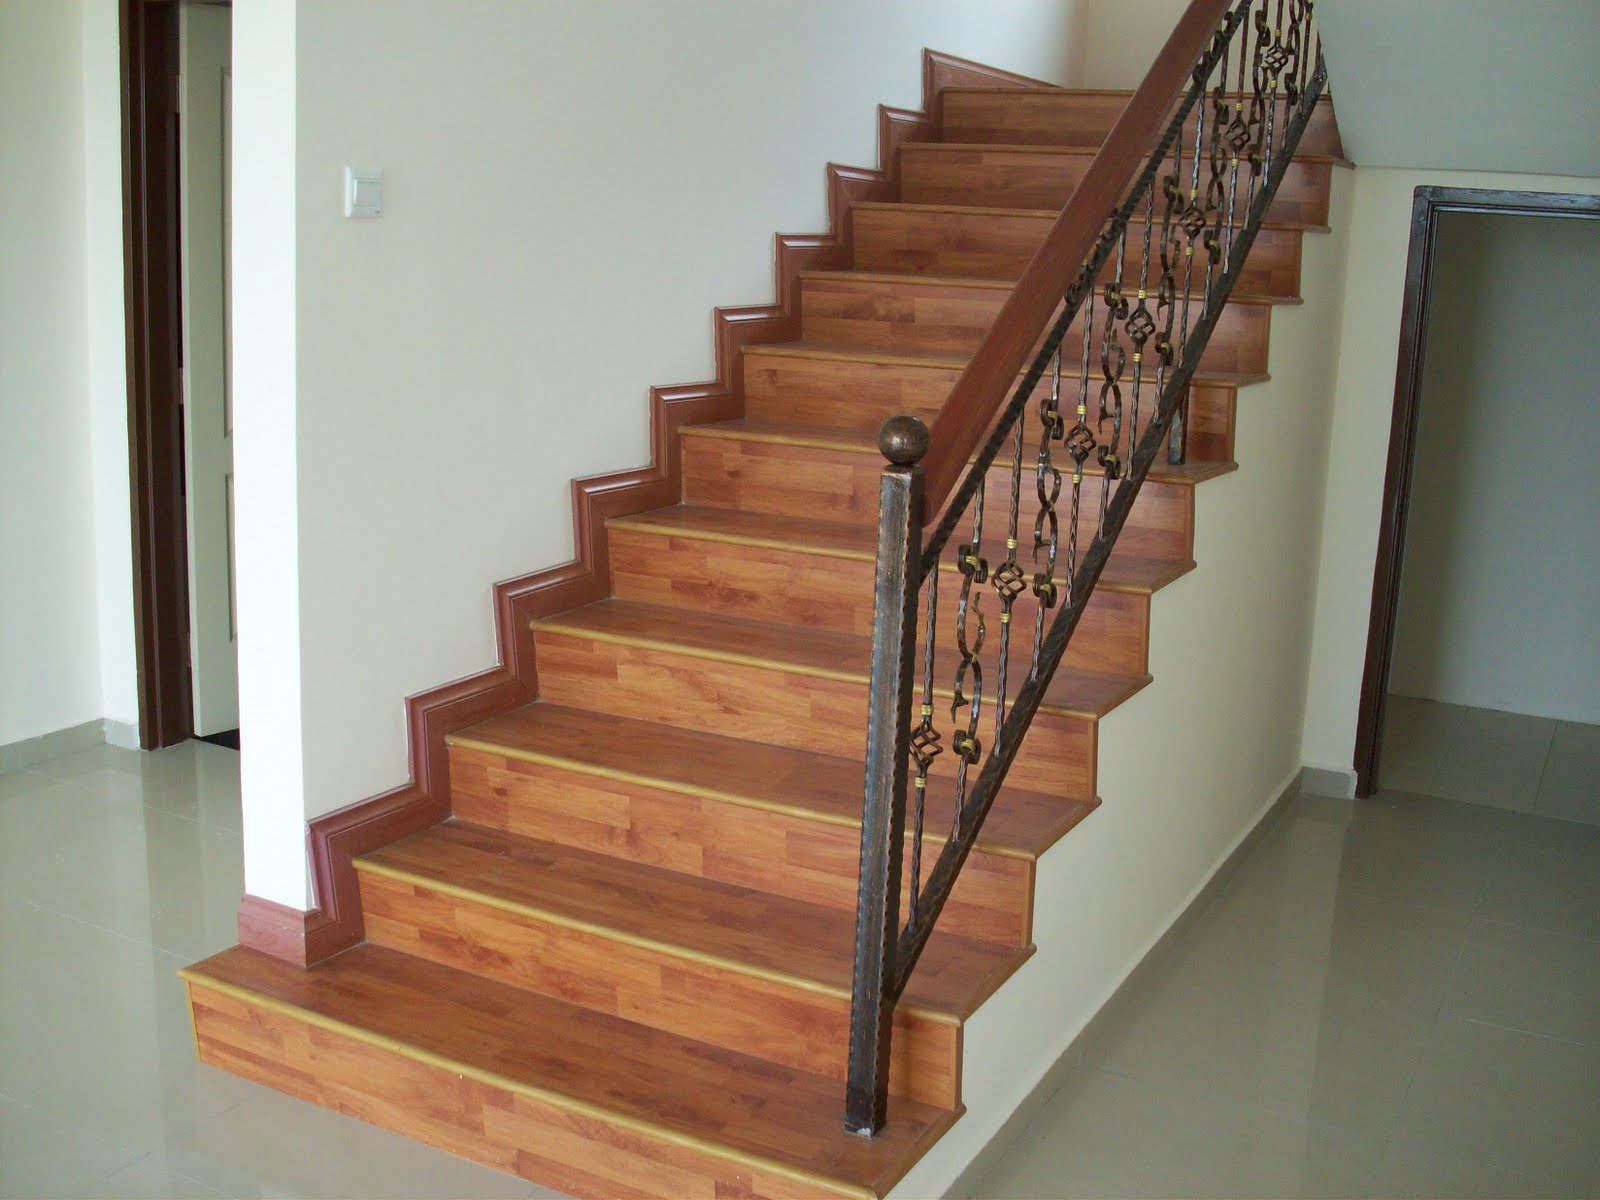 How To Install Wood Flooring On Stairs, Can You Put Wood Flooring On Stairs